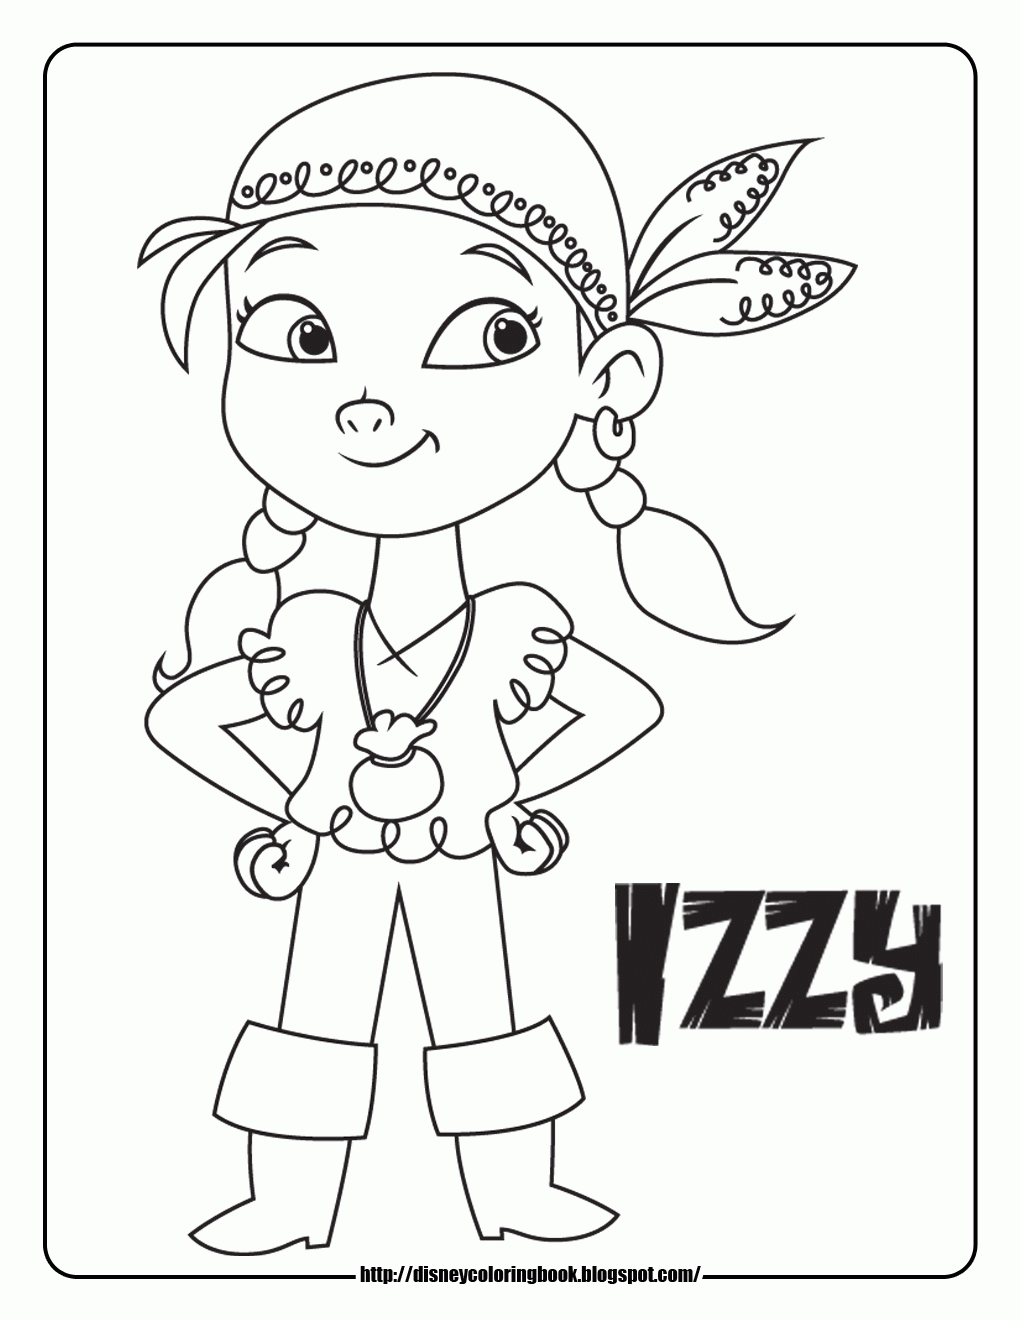 Printable Jake and The Neverland Pirates Coloring Pages #4997 Jake ...